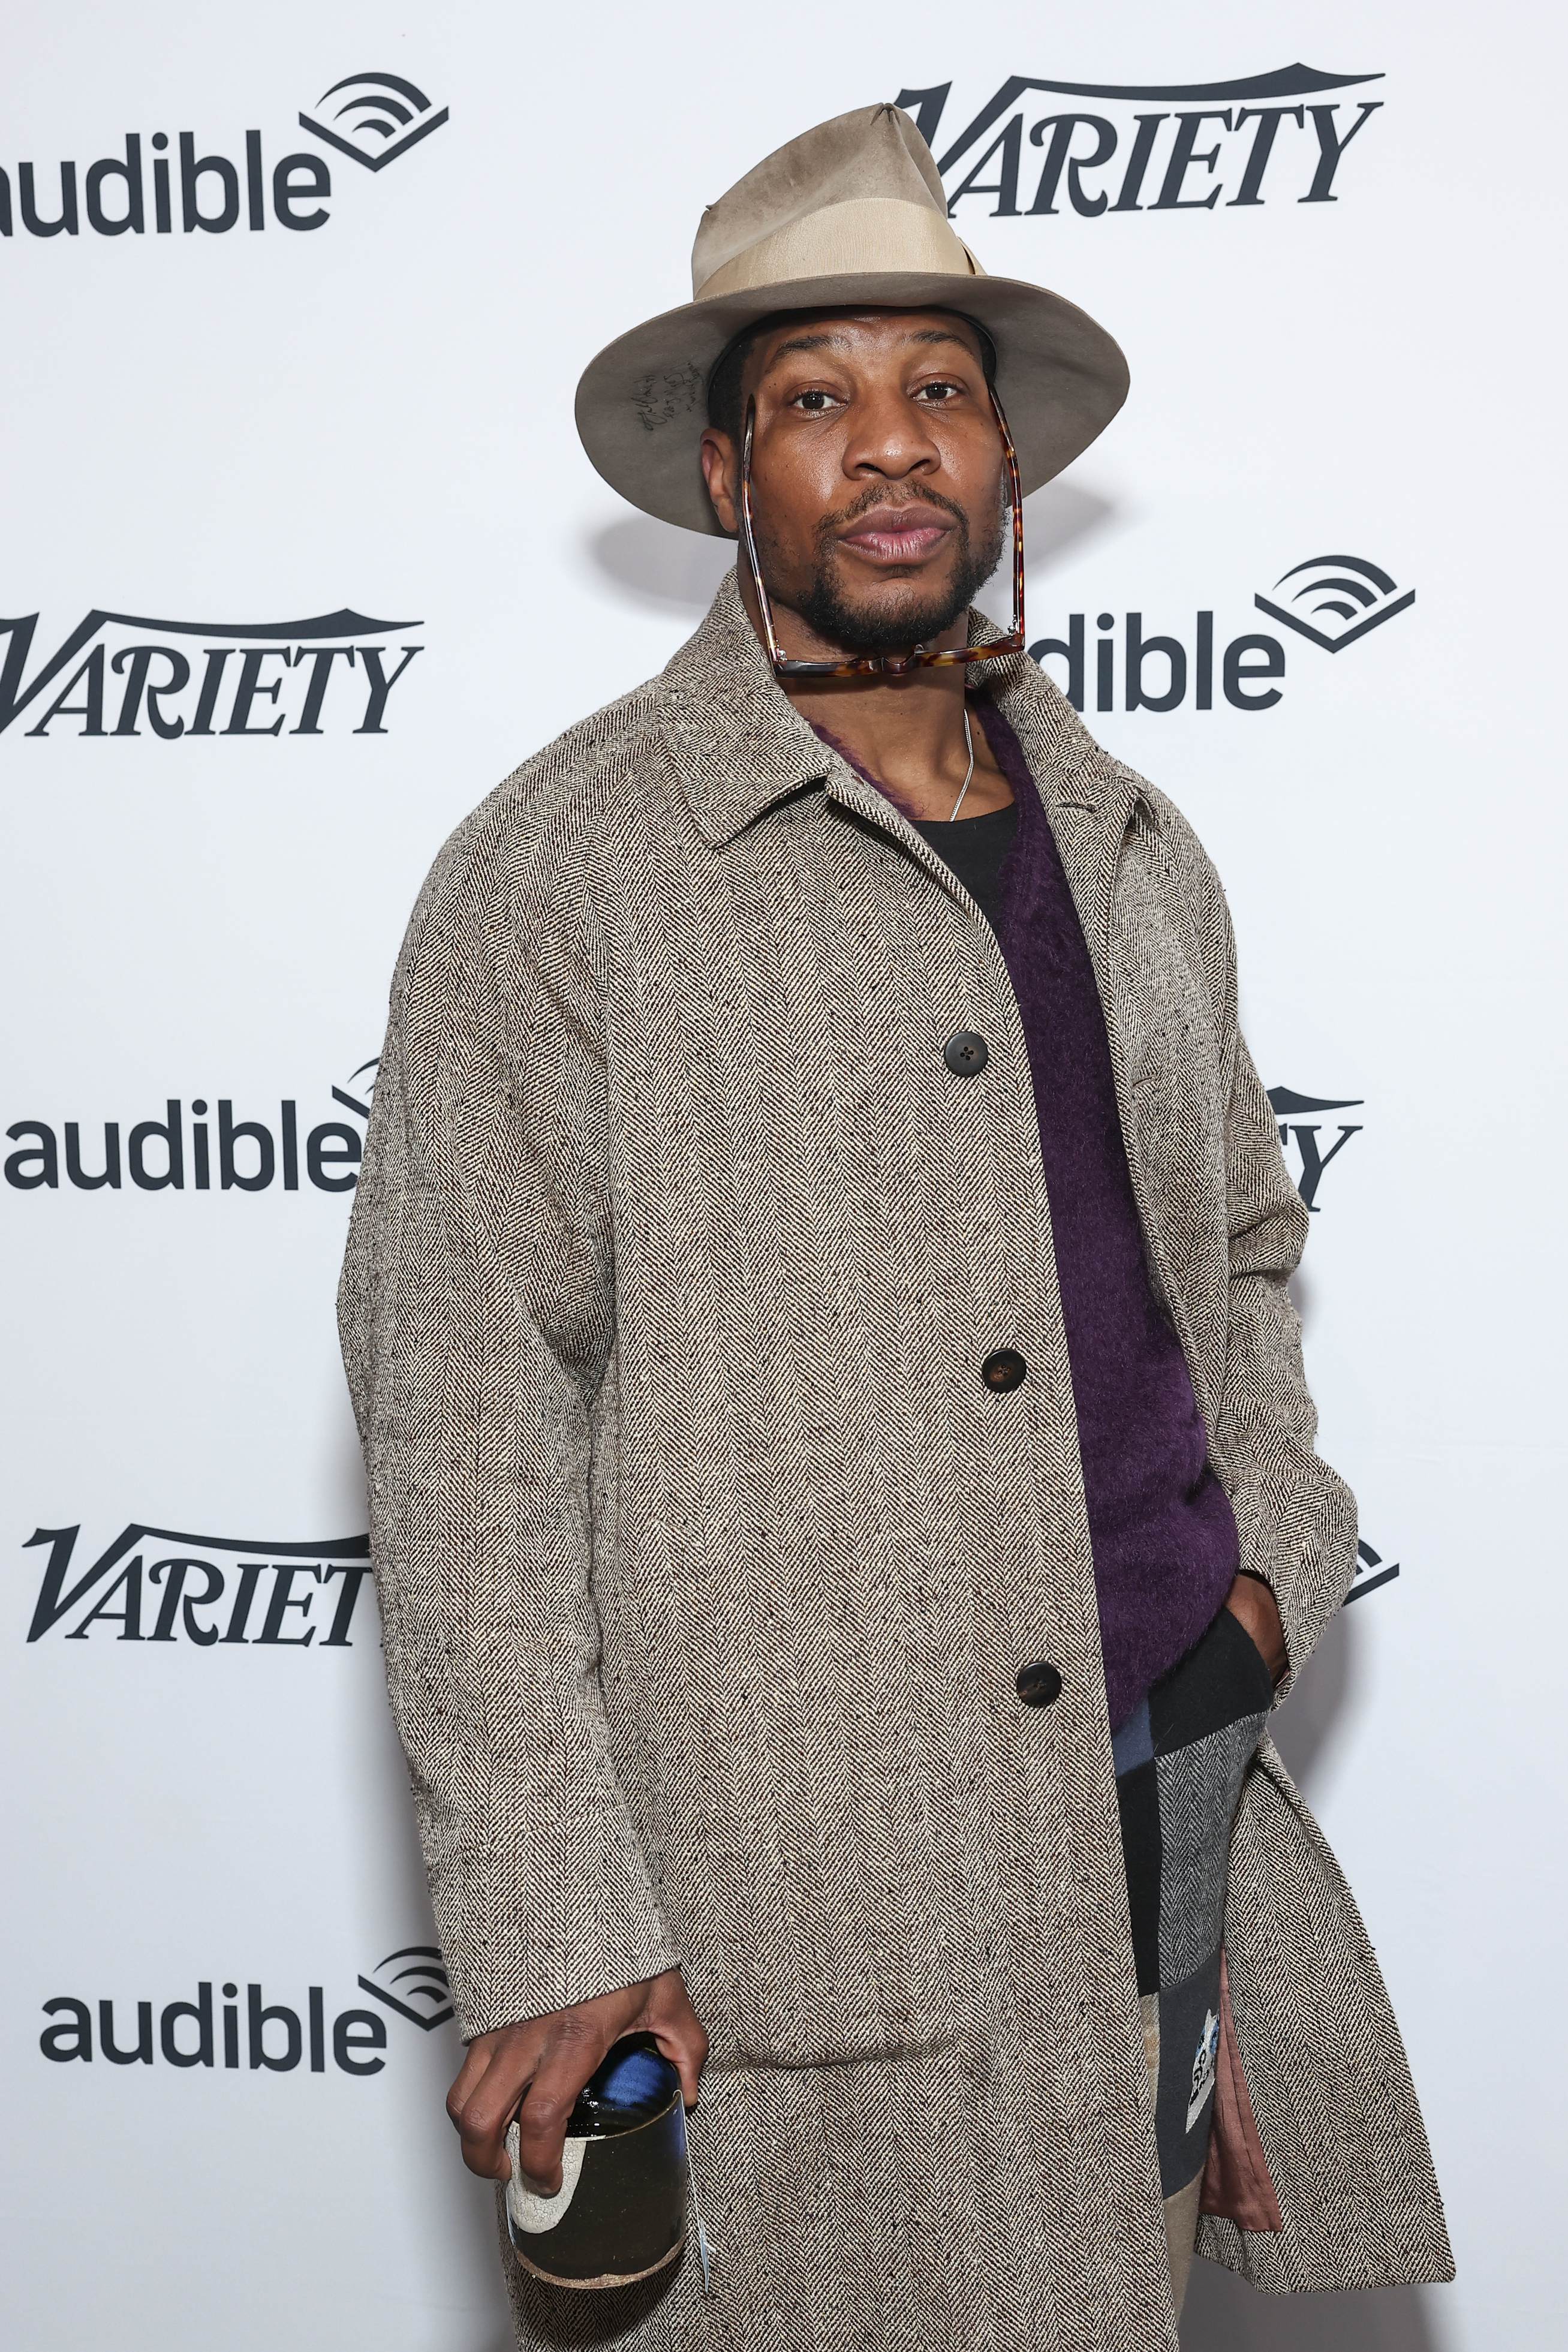 Variety Sundance Studio, Presented by Audible - Day 2